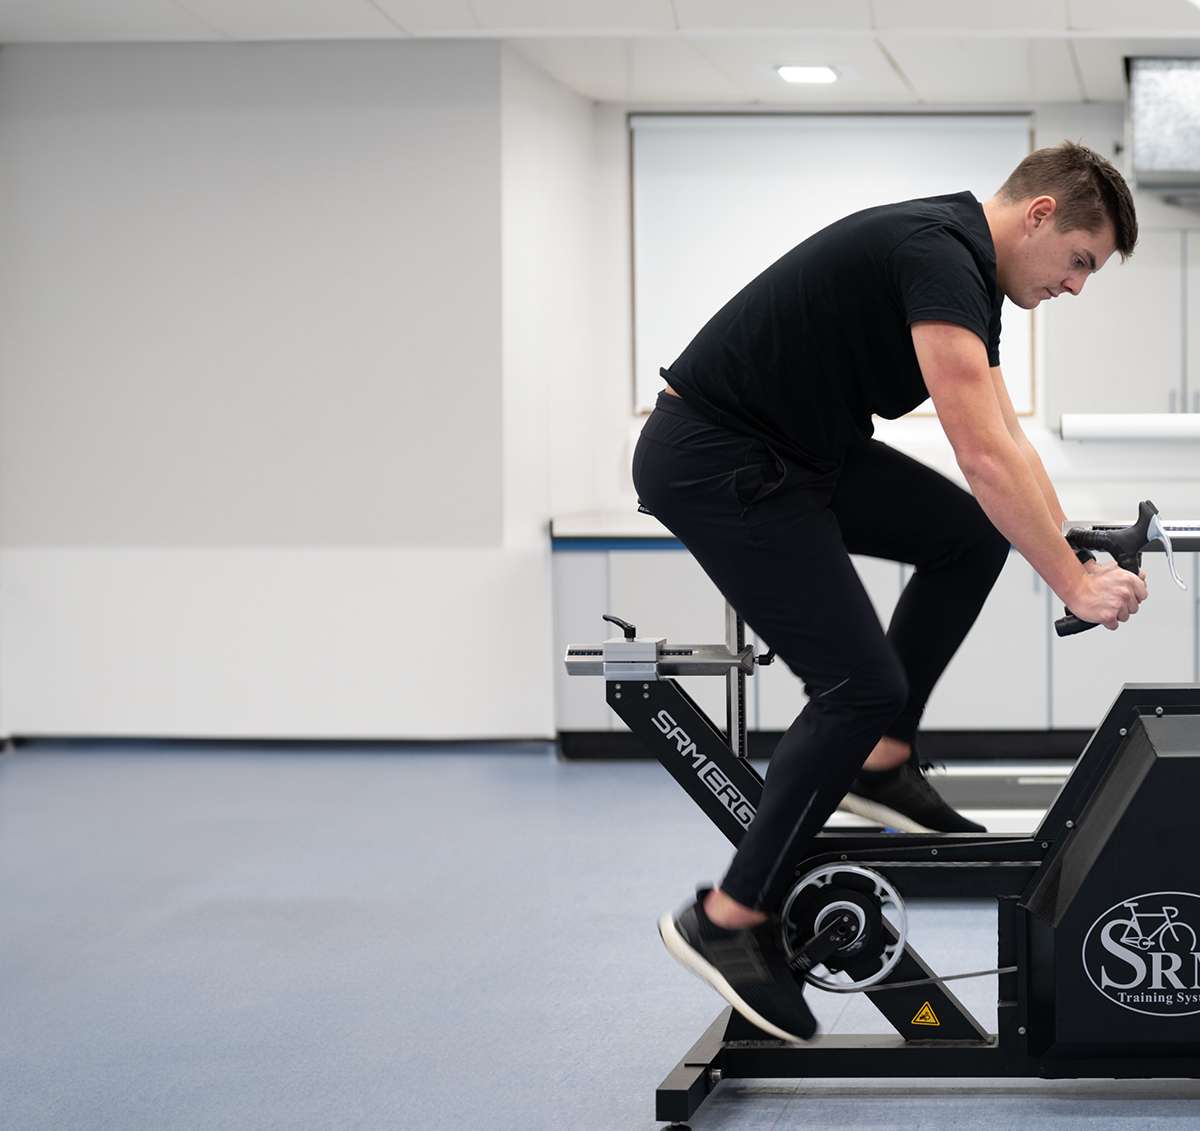 Sport and Exercise Science BSc (Hons) degree course - London undergraduate  courses - Kingston University London